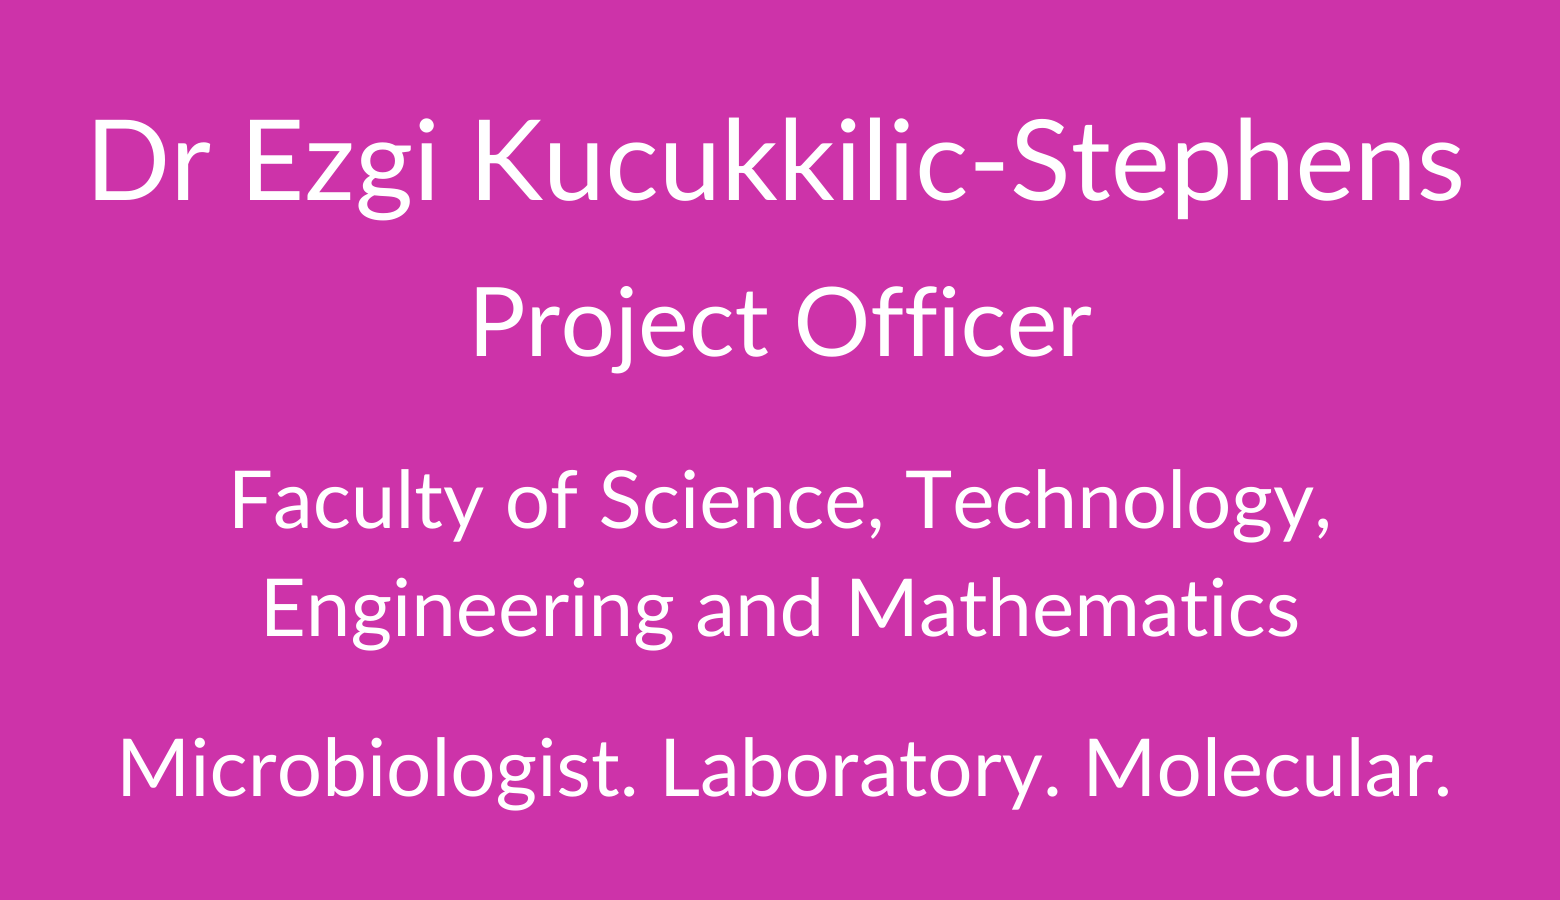 Dr Ezgi Kucukkilic-Stephens. Project Officer. Faculty of Science. Technology, Engineering and Mathematics. Microbiologist. Laboratory. Molecular. 